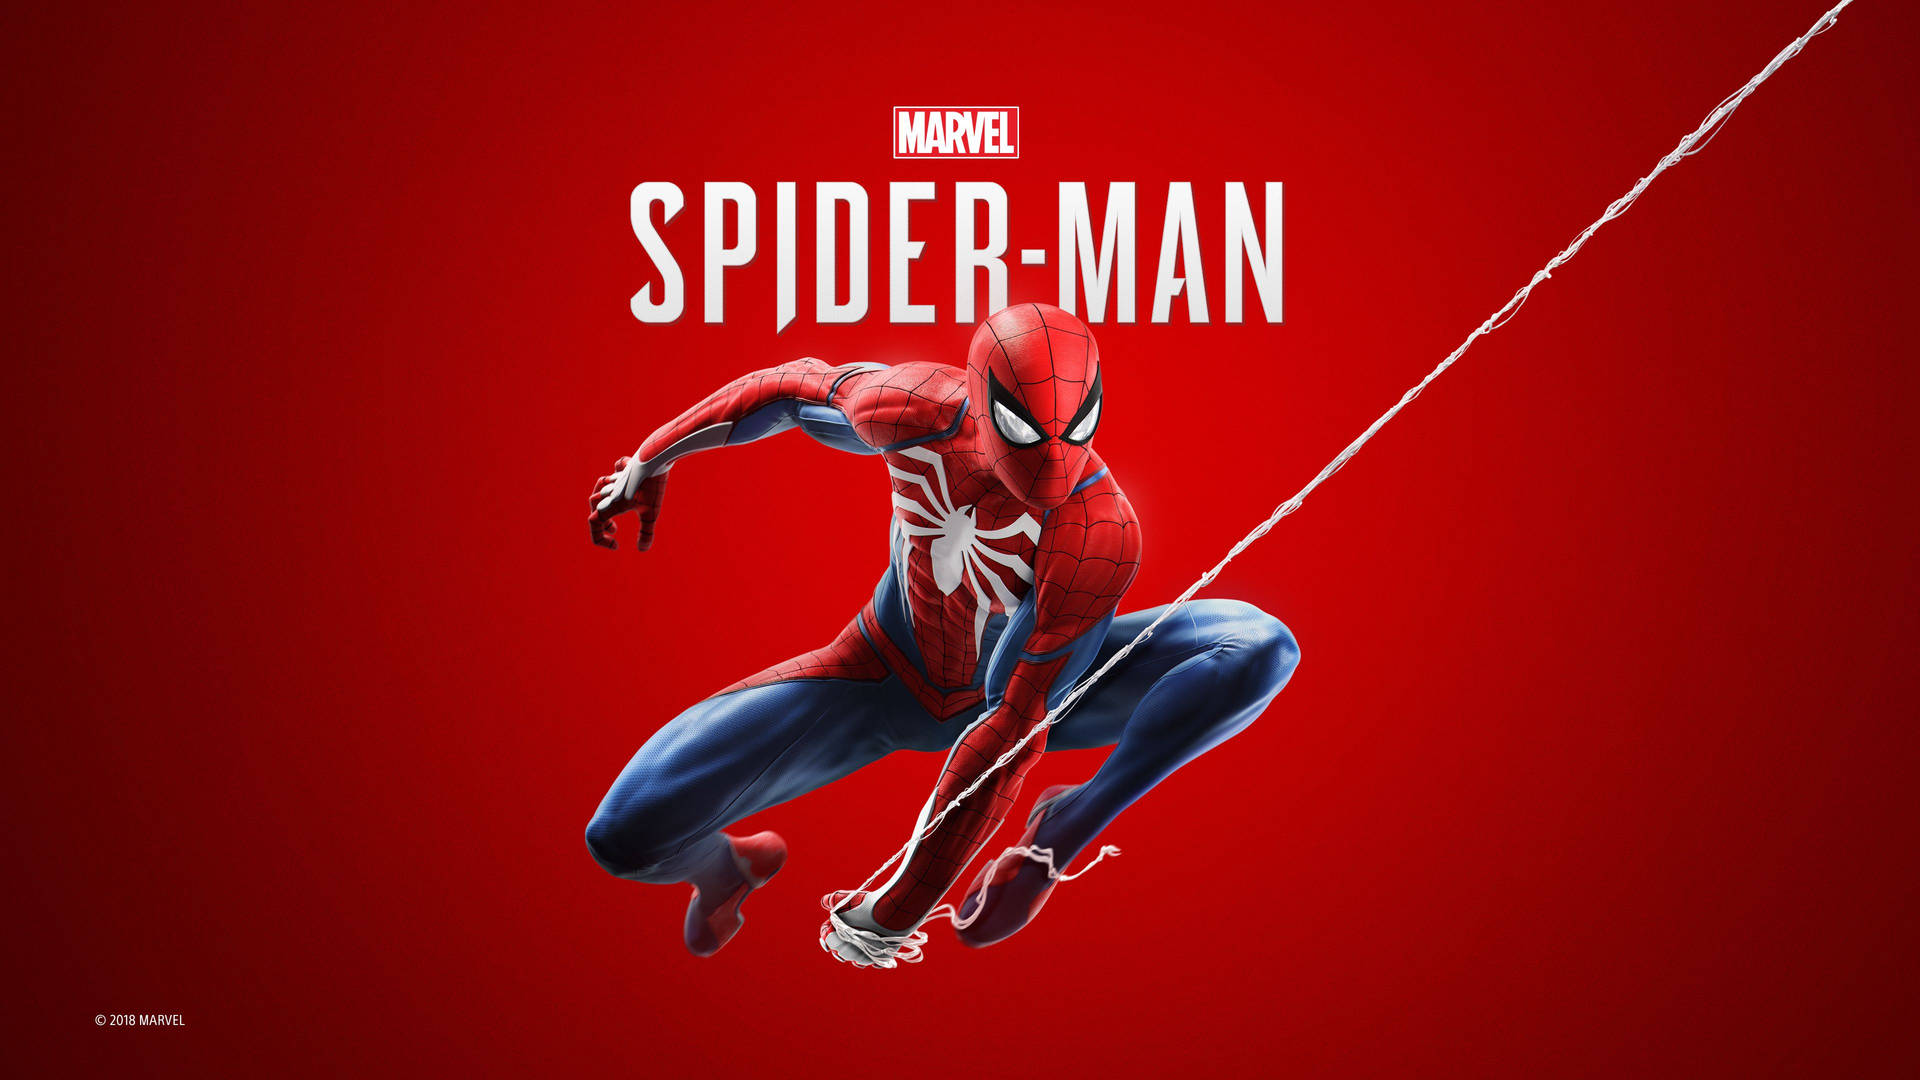 Spiderman holds his web proudly above a red background. Wallpaper